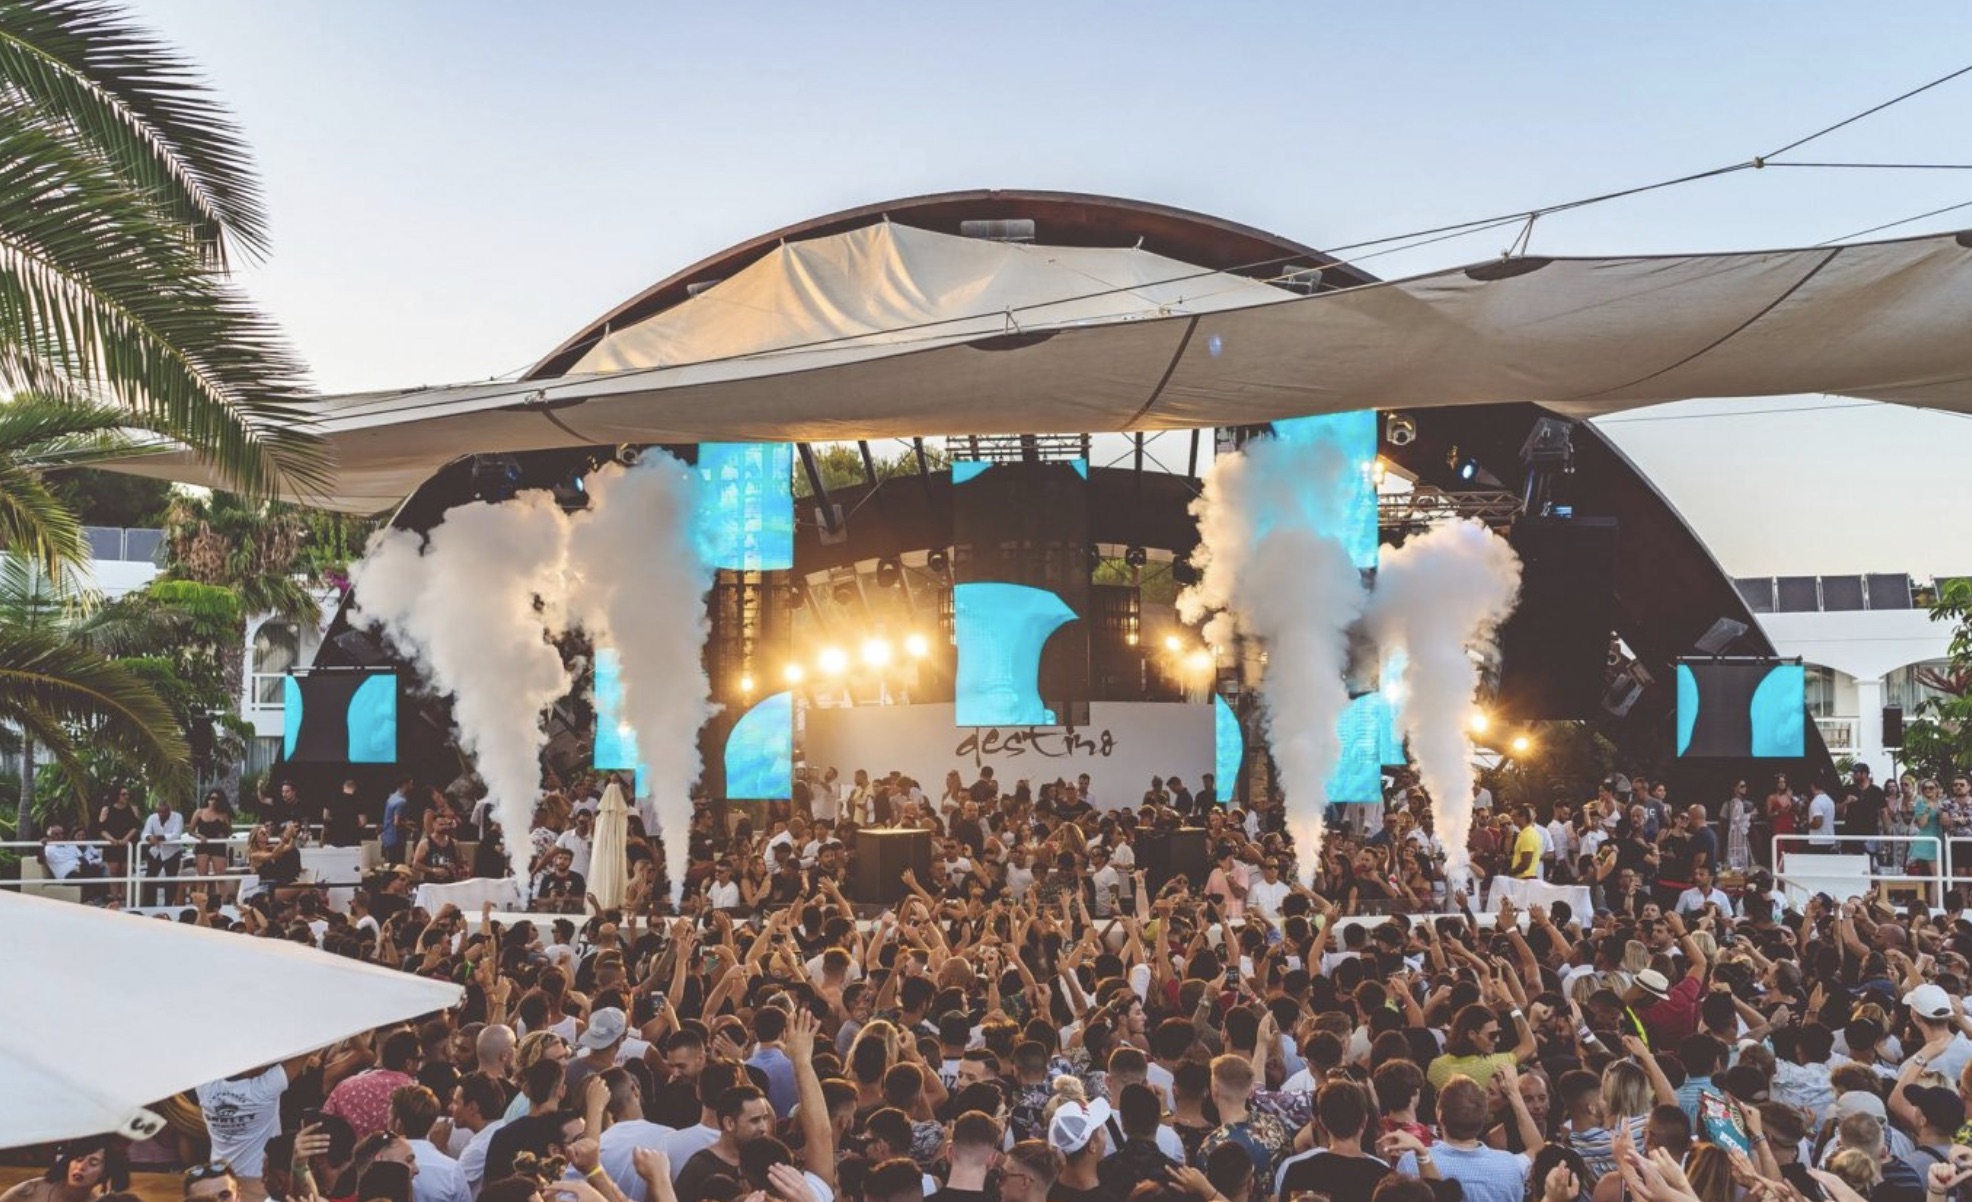 Multiple openair venues announce opening parties